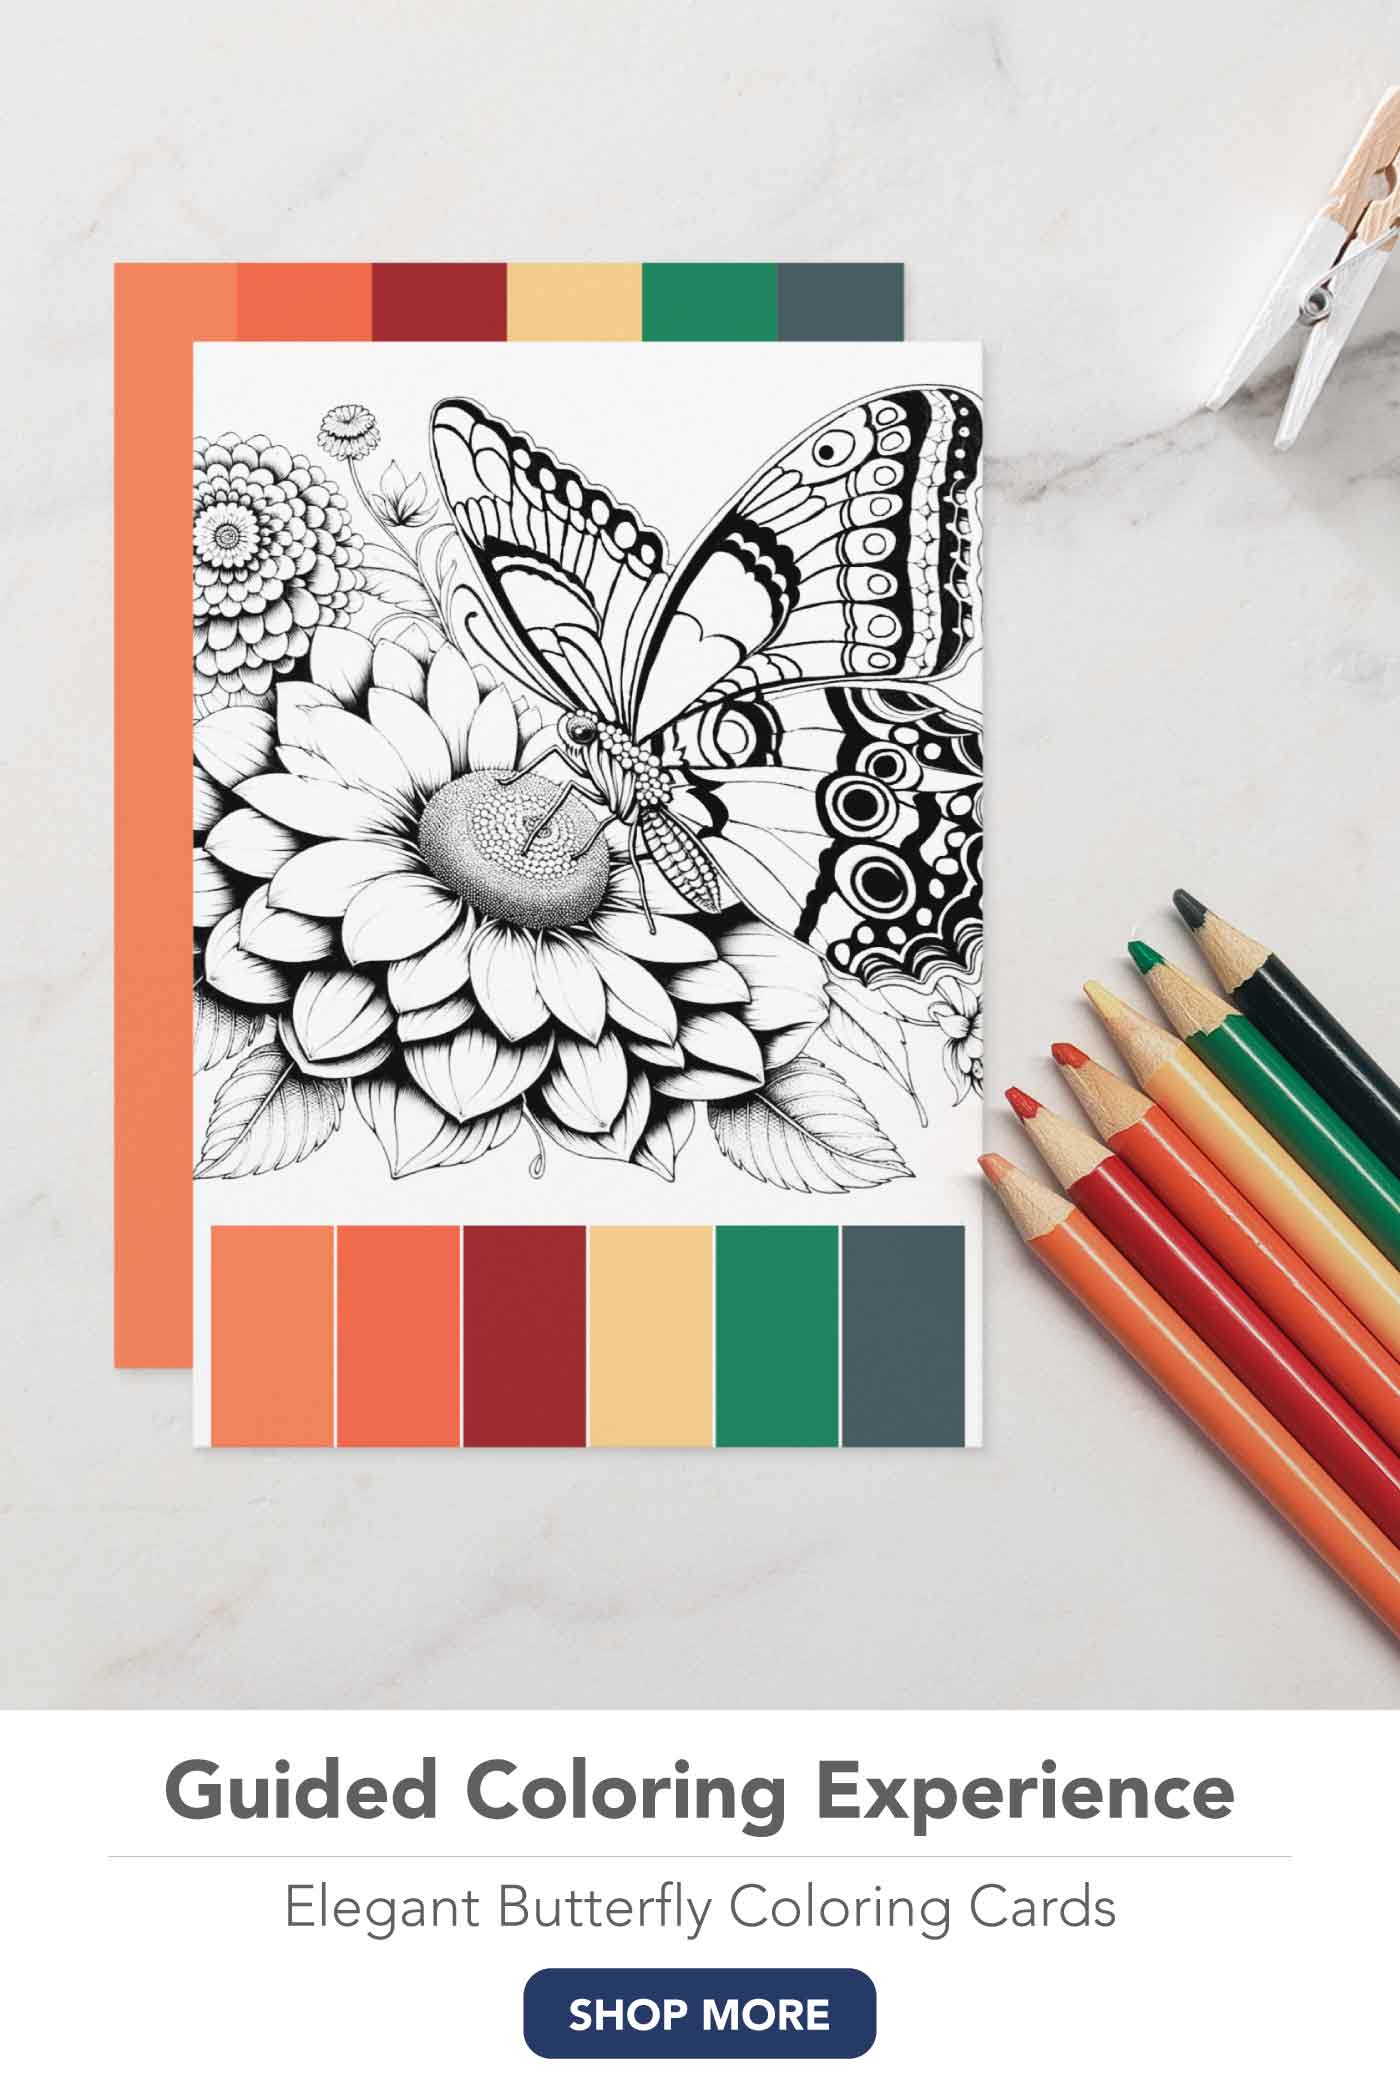 Click to shop these coloring template cards and level up your coloring techniques with colored pencils. 